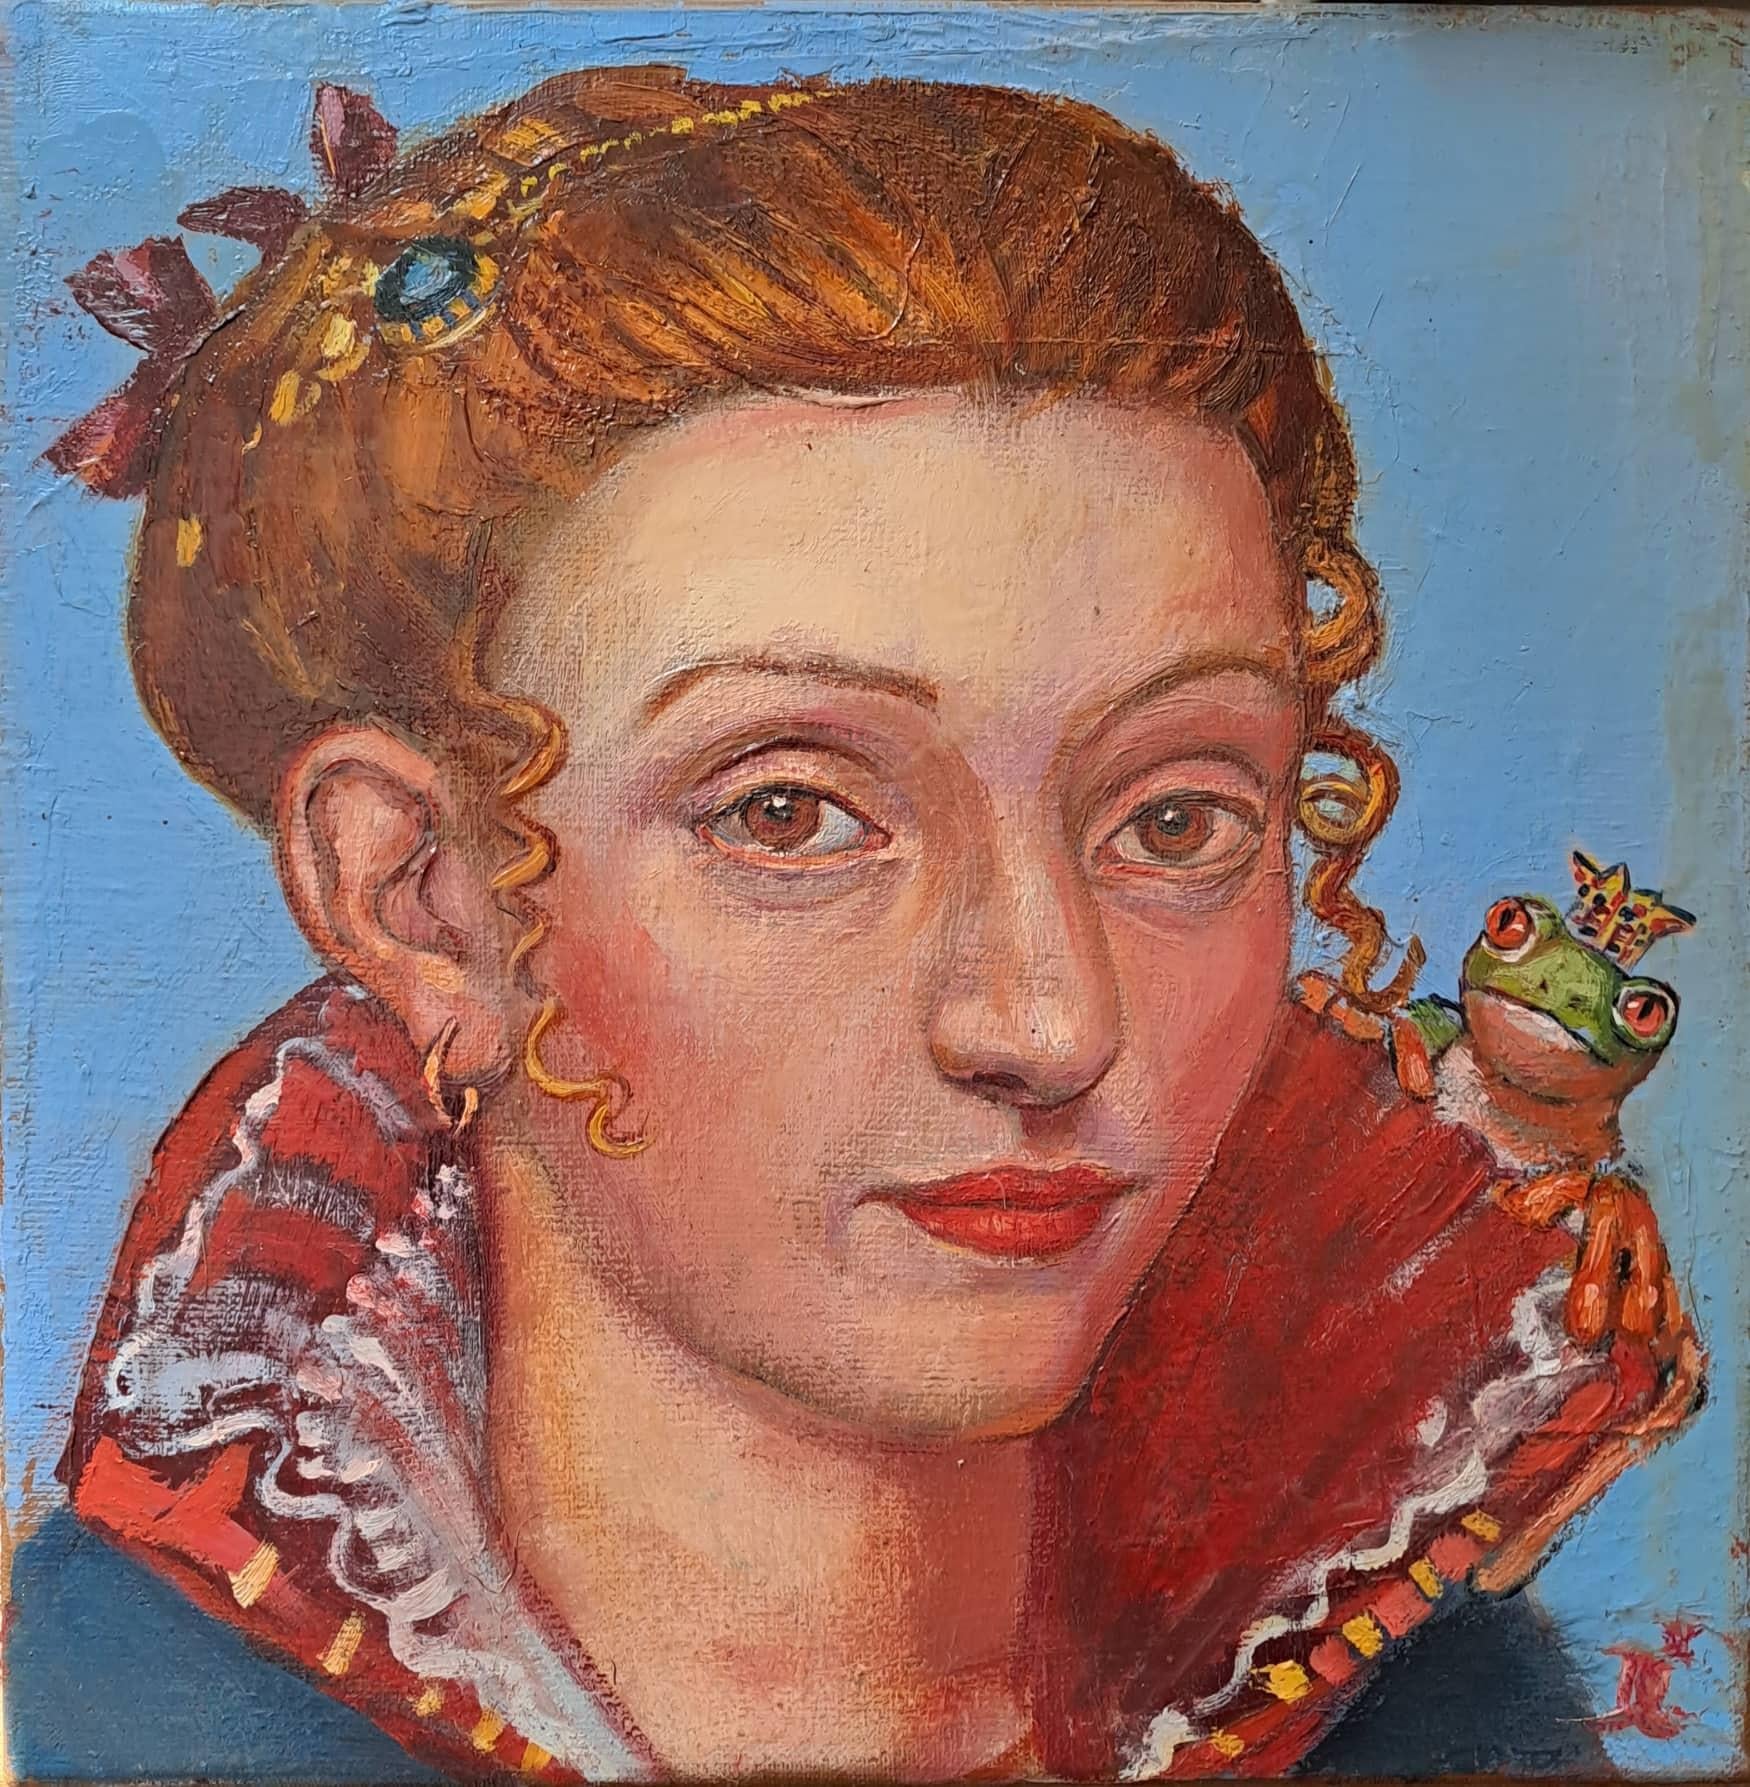 Dagnia Cherevichnika Animal Painting - Princess with a frog. 2014. Oil on canvas, 20x20 cm